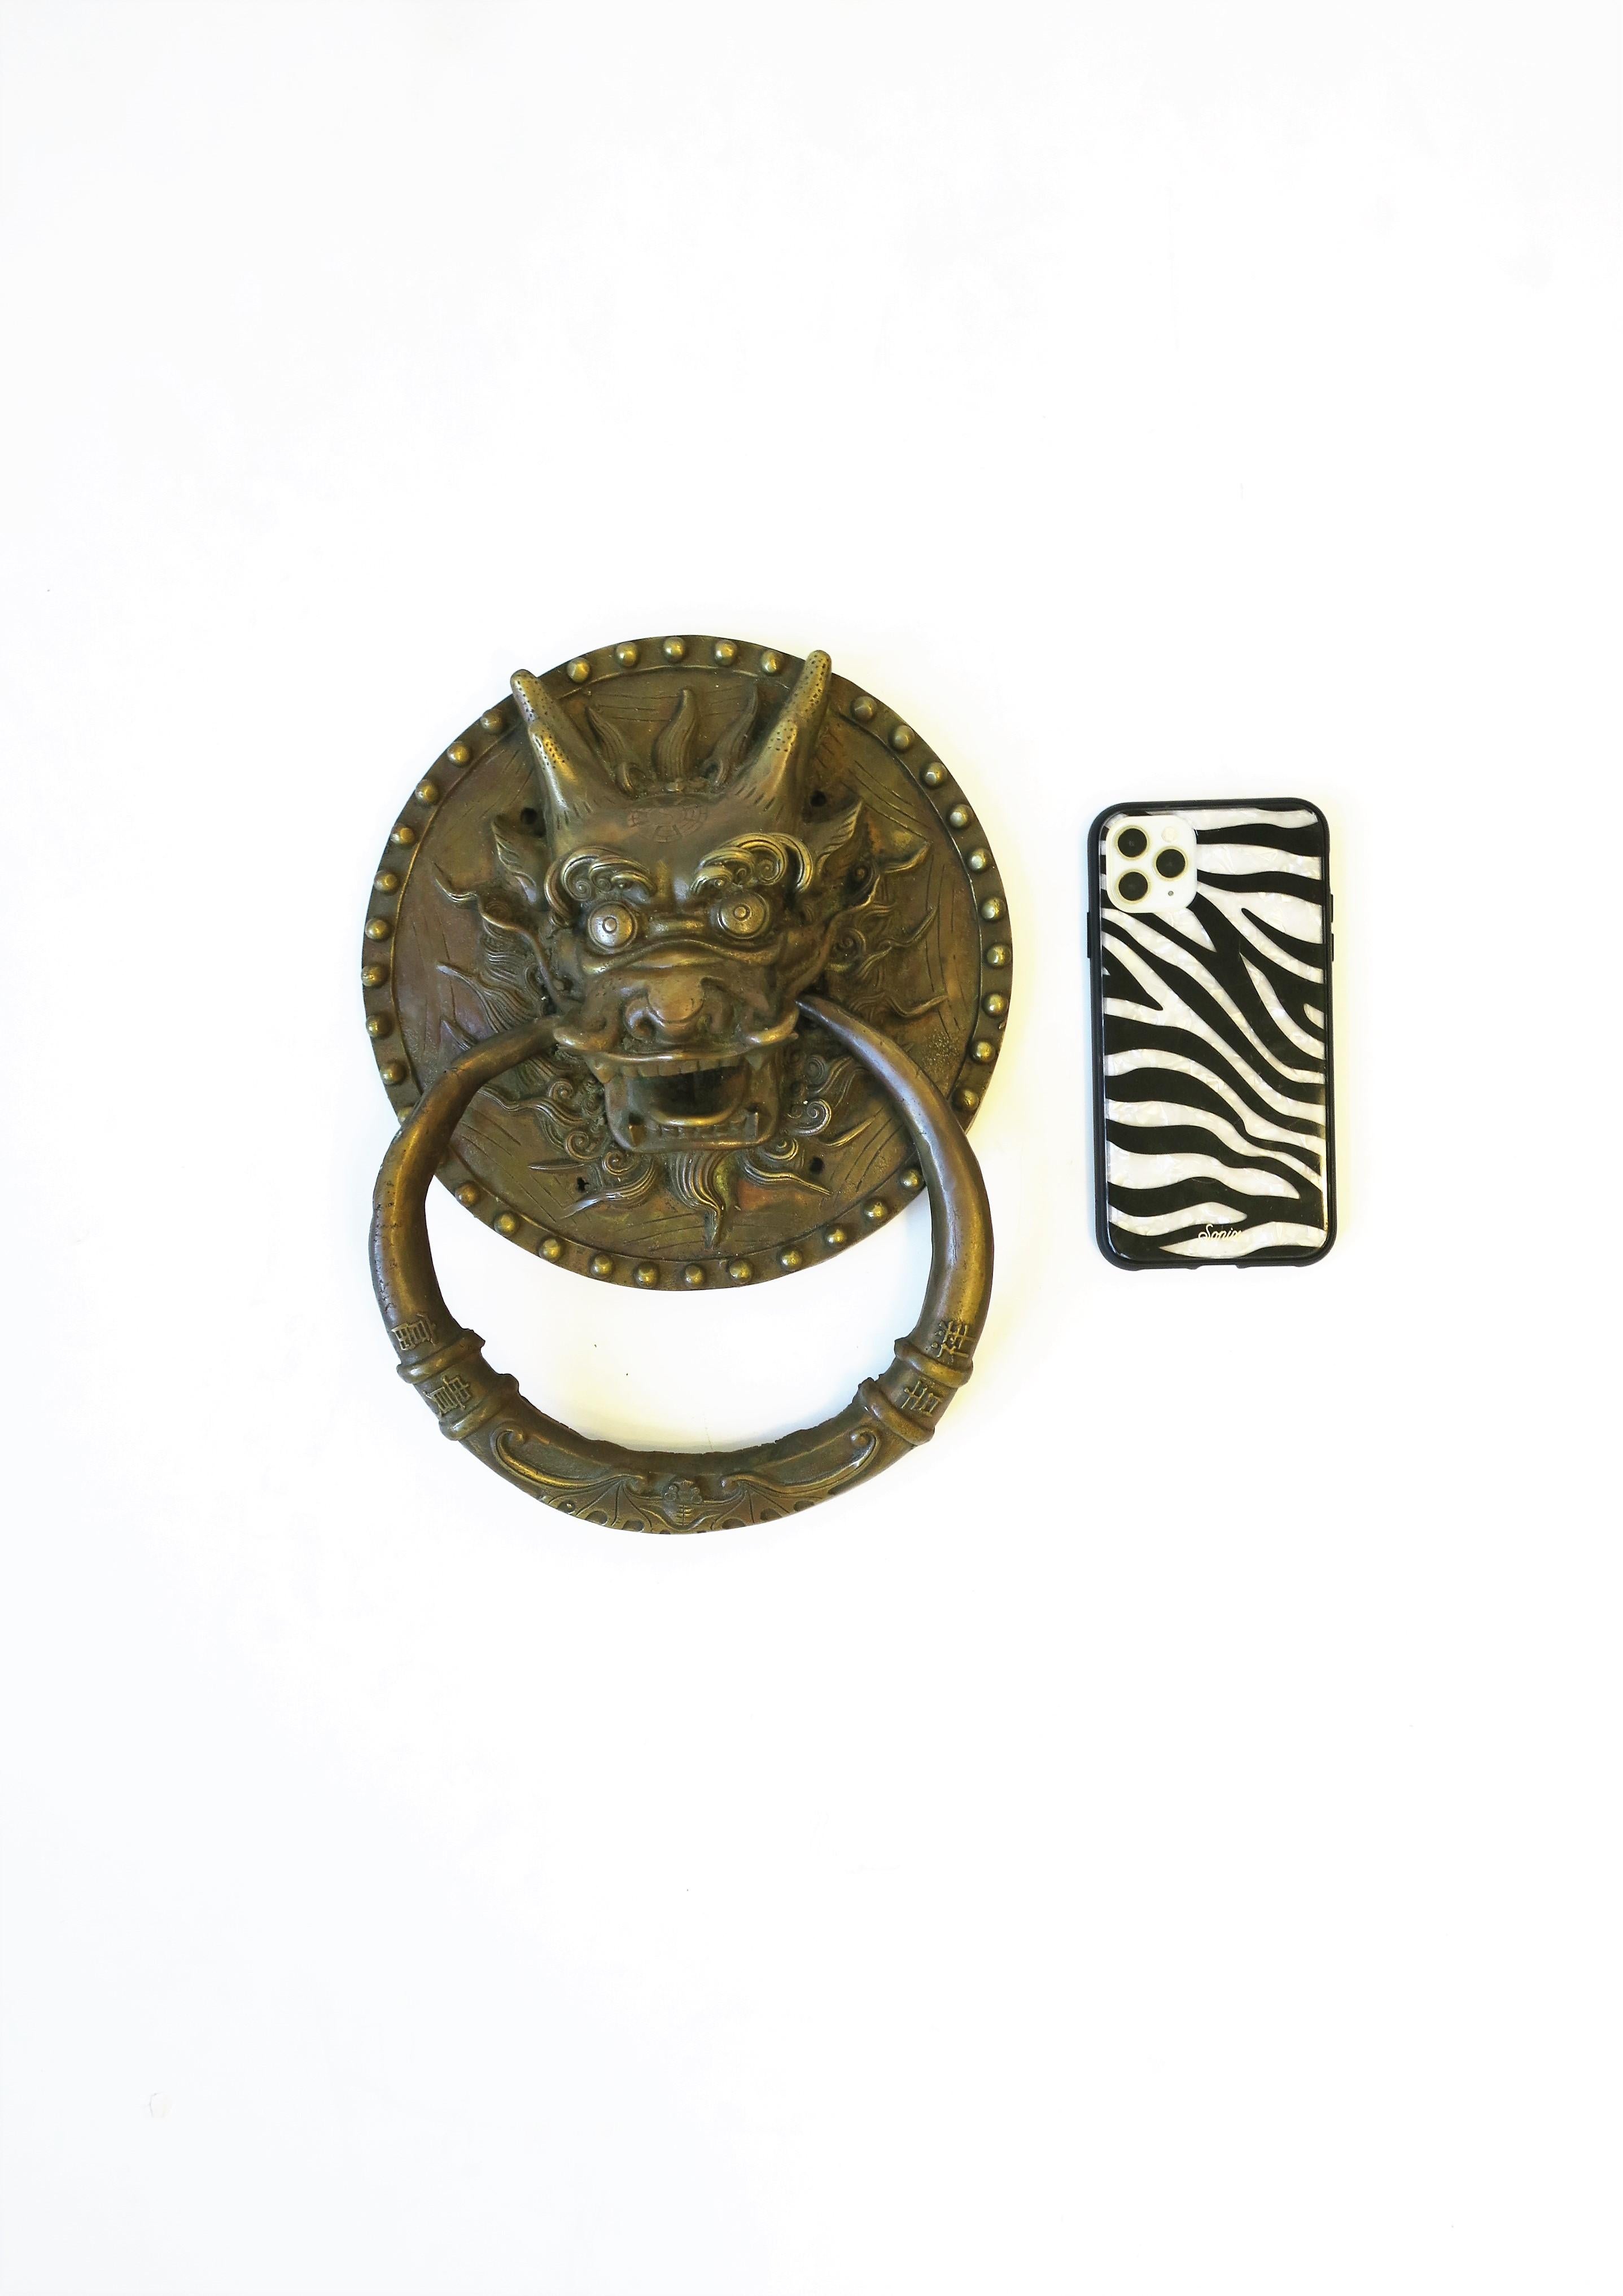 Dragon Brass Door Knocker, Large In Good Condition For Sale In New York, NY